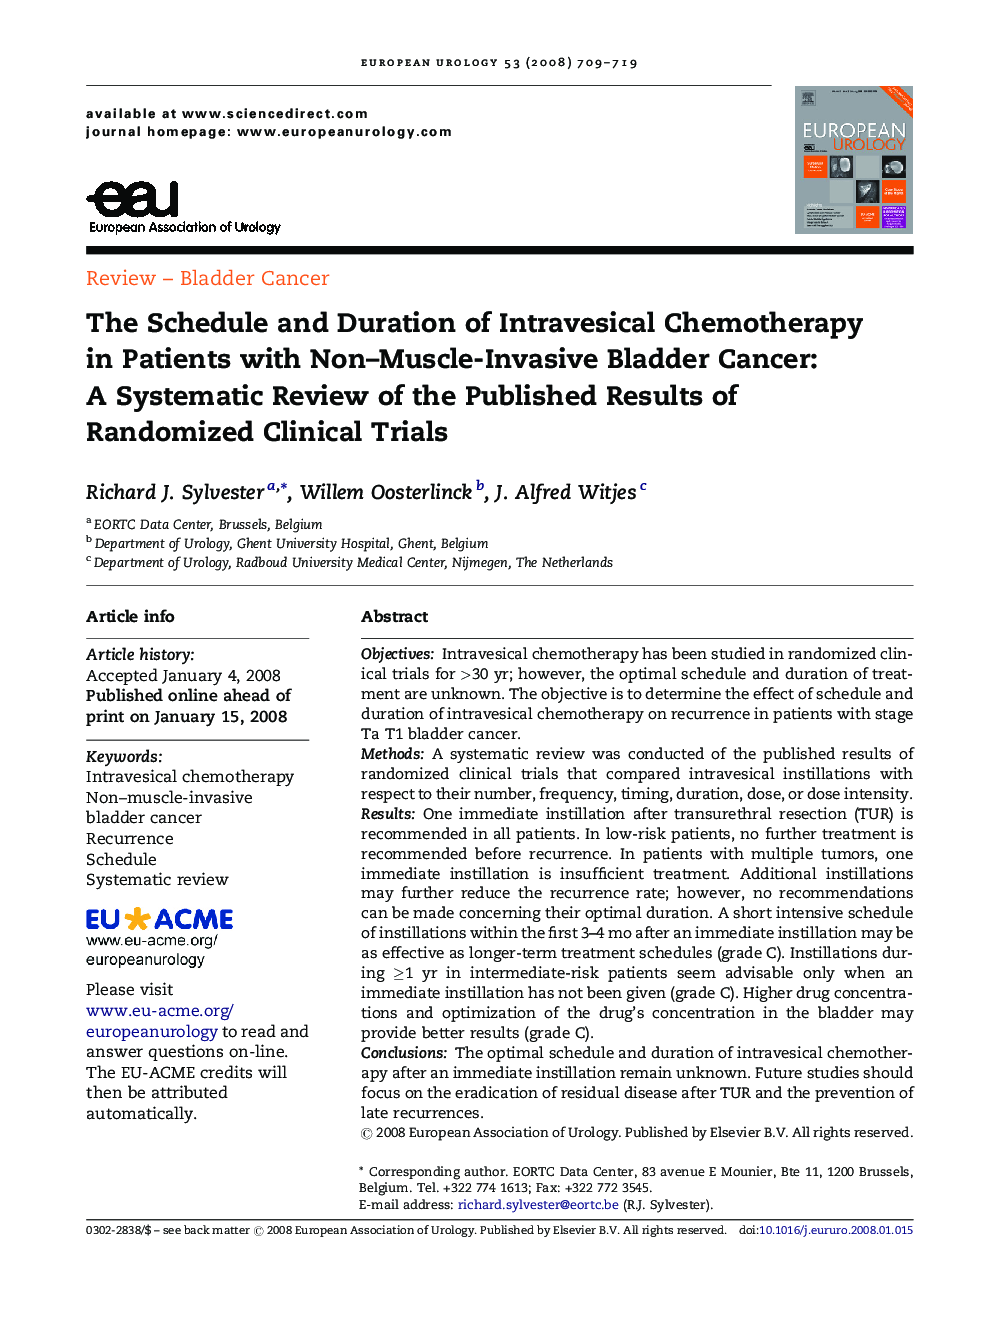 The Schedule and Duration of Intravesical Chemotherapy in Patients with Non–Muscle-Invasive Bladder Cancer: A Systematic Review of the Published Results of Randomized Clinical Trials 